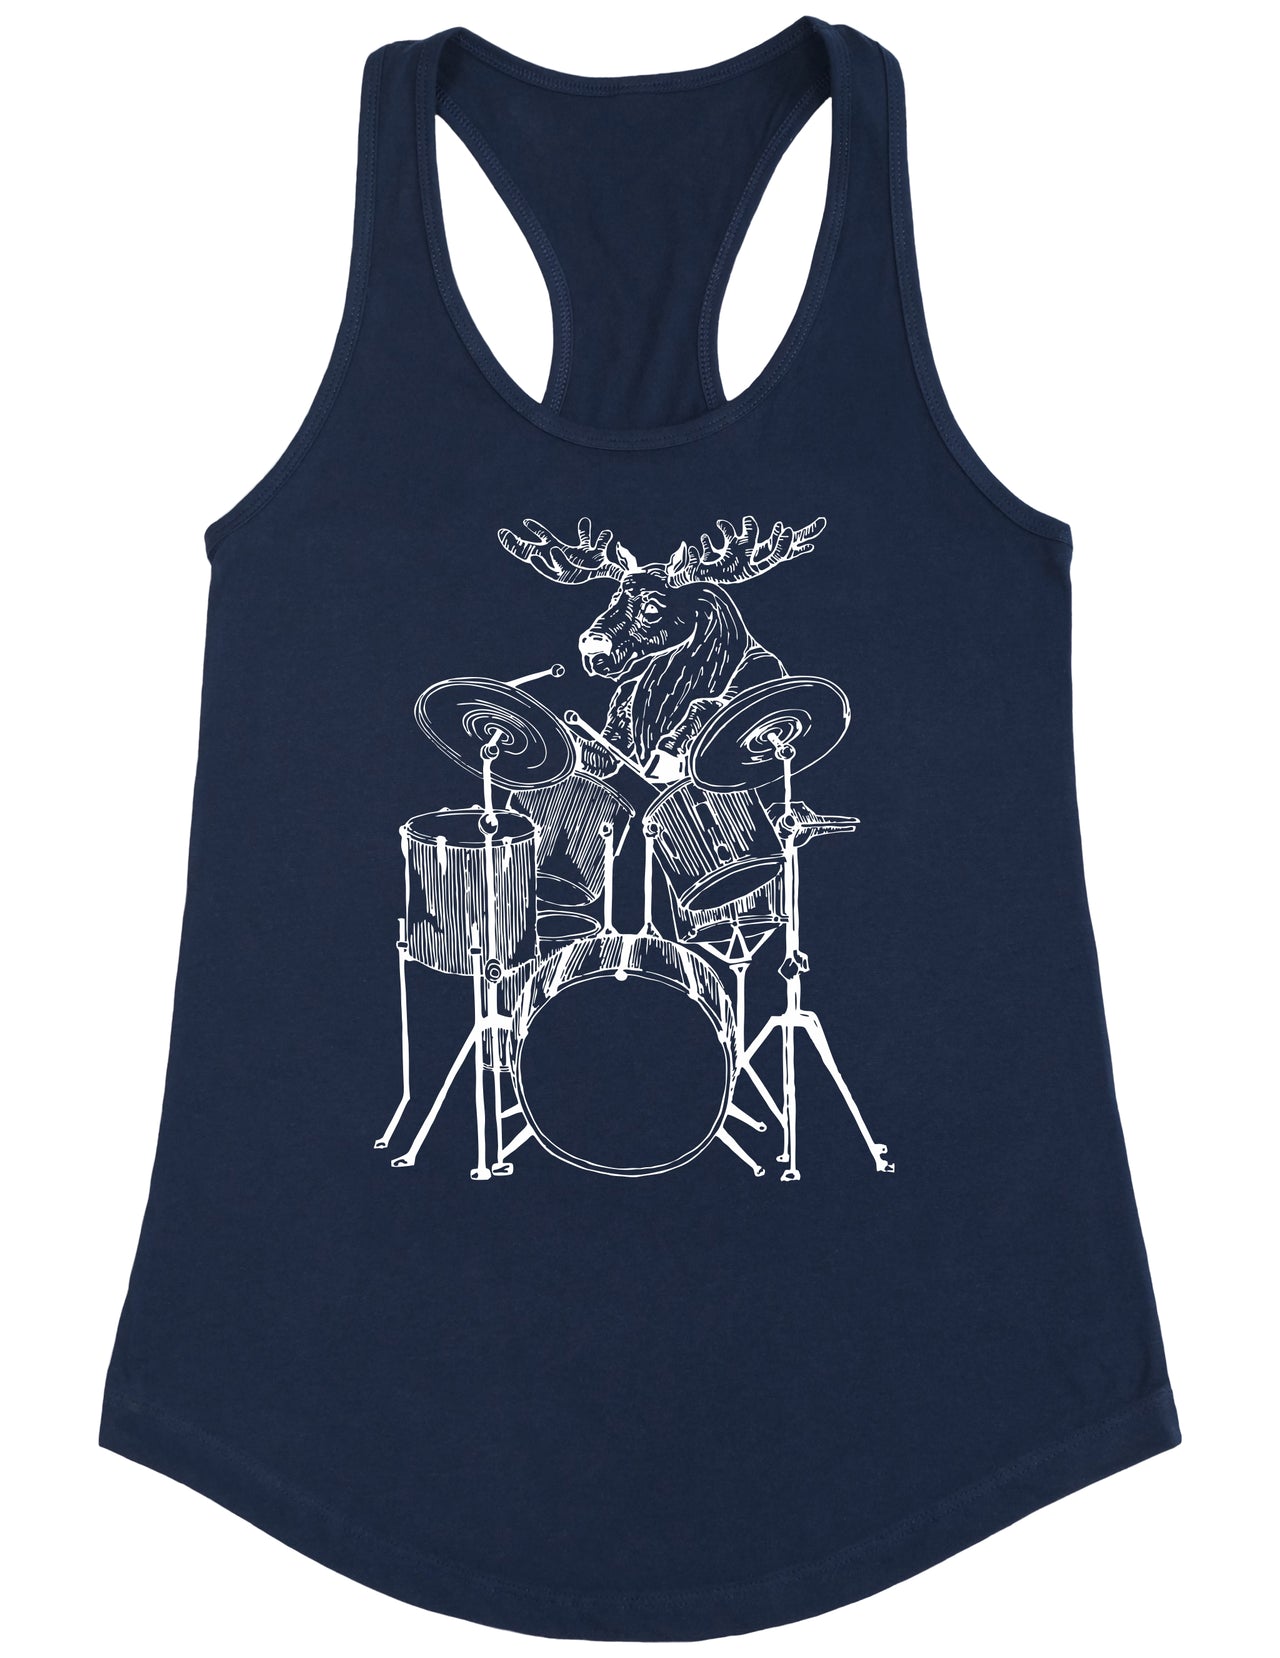 SEEMBO Moose Playing Drums Women's Poly-Cotton Tank Top